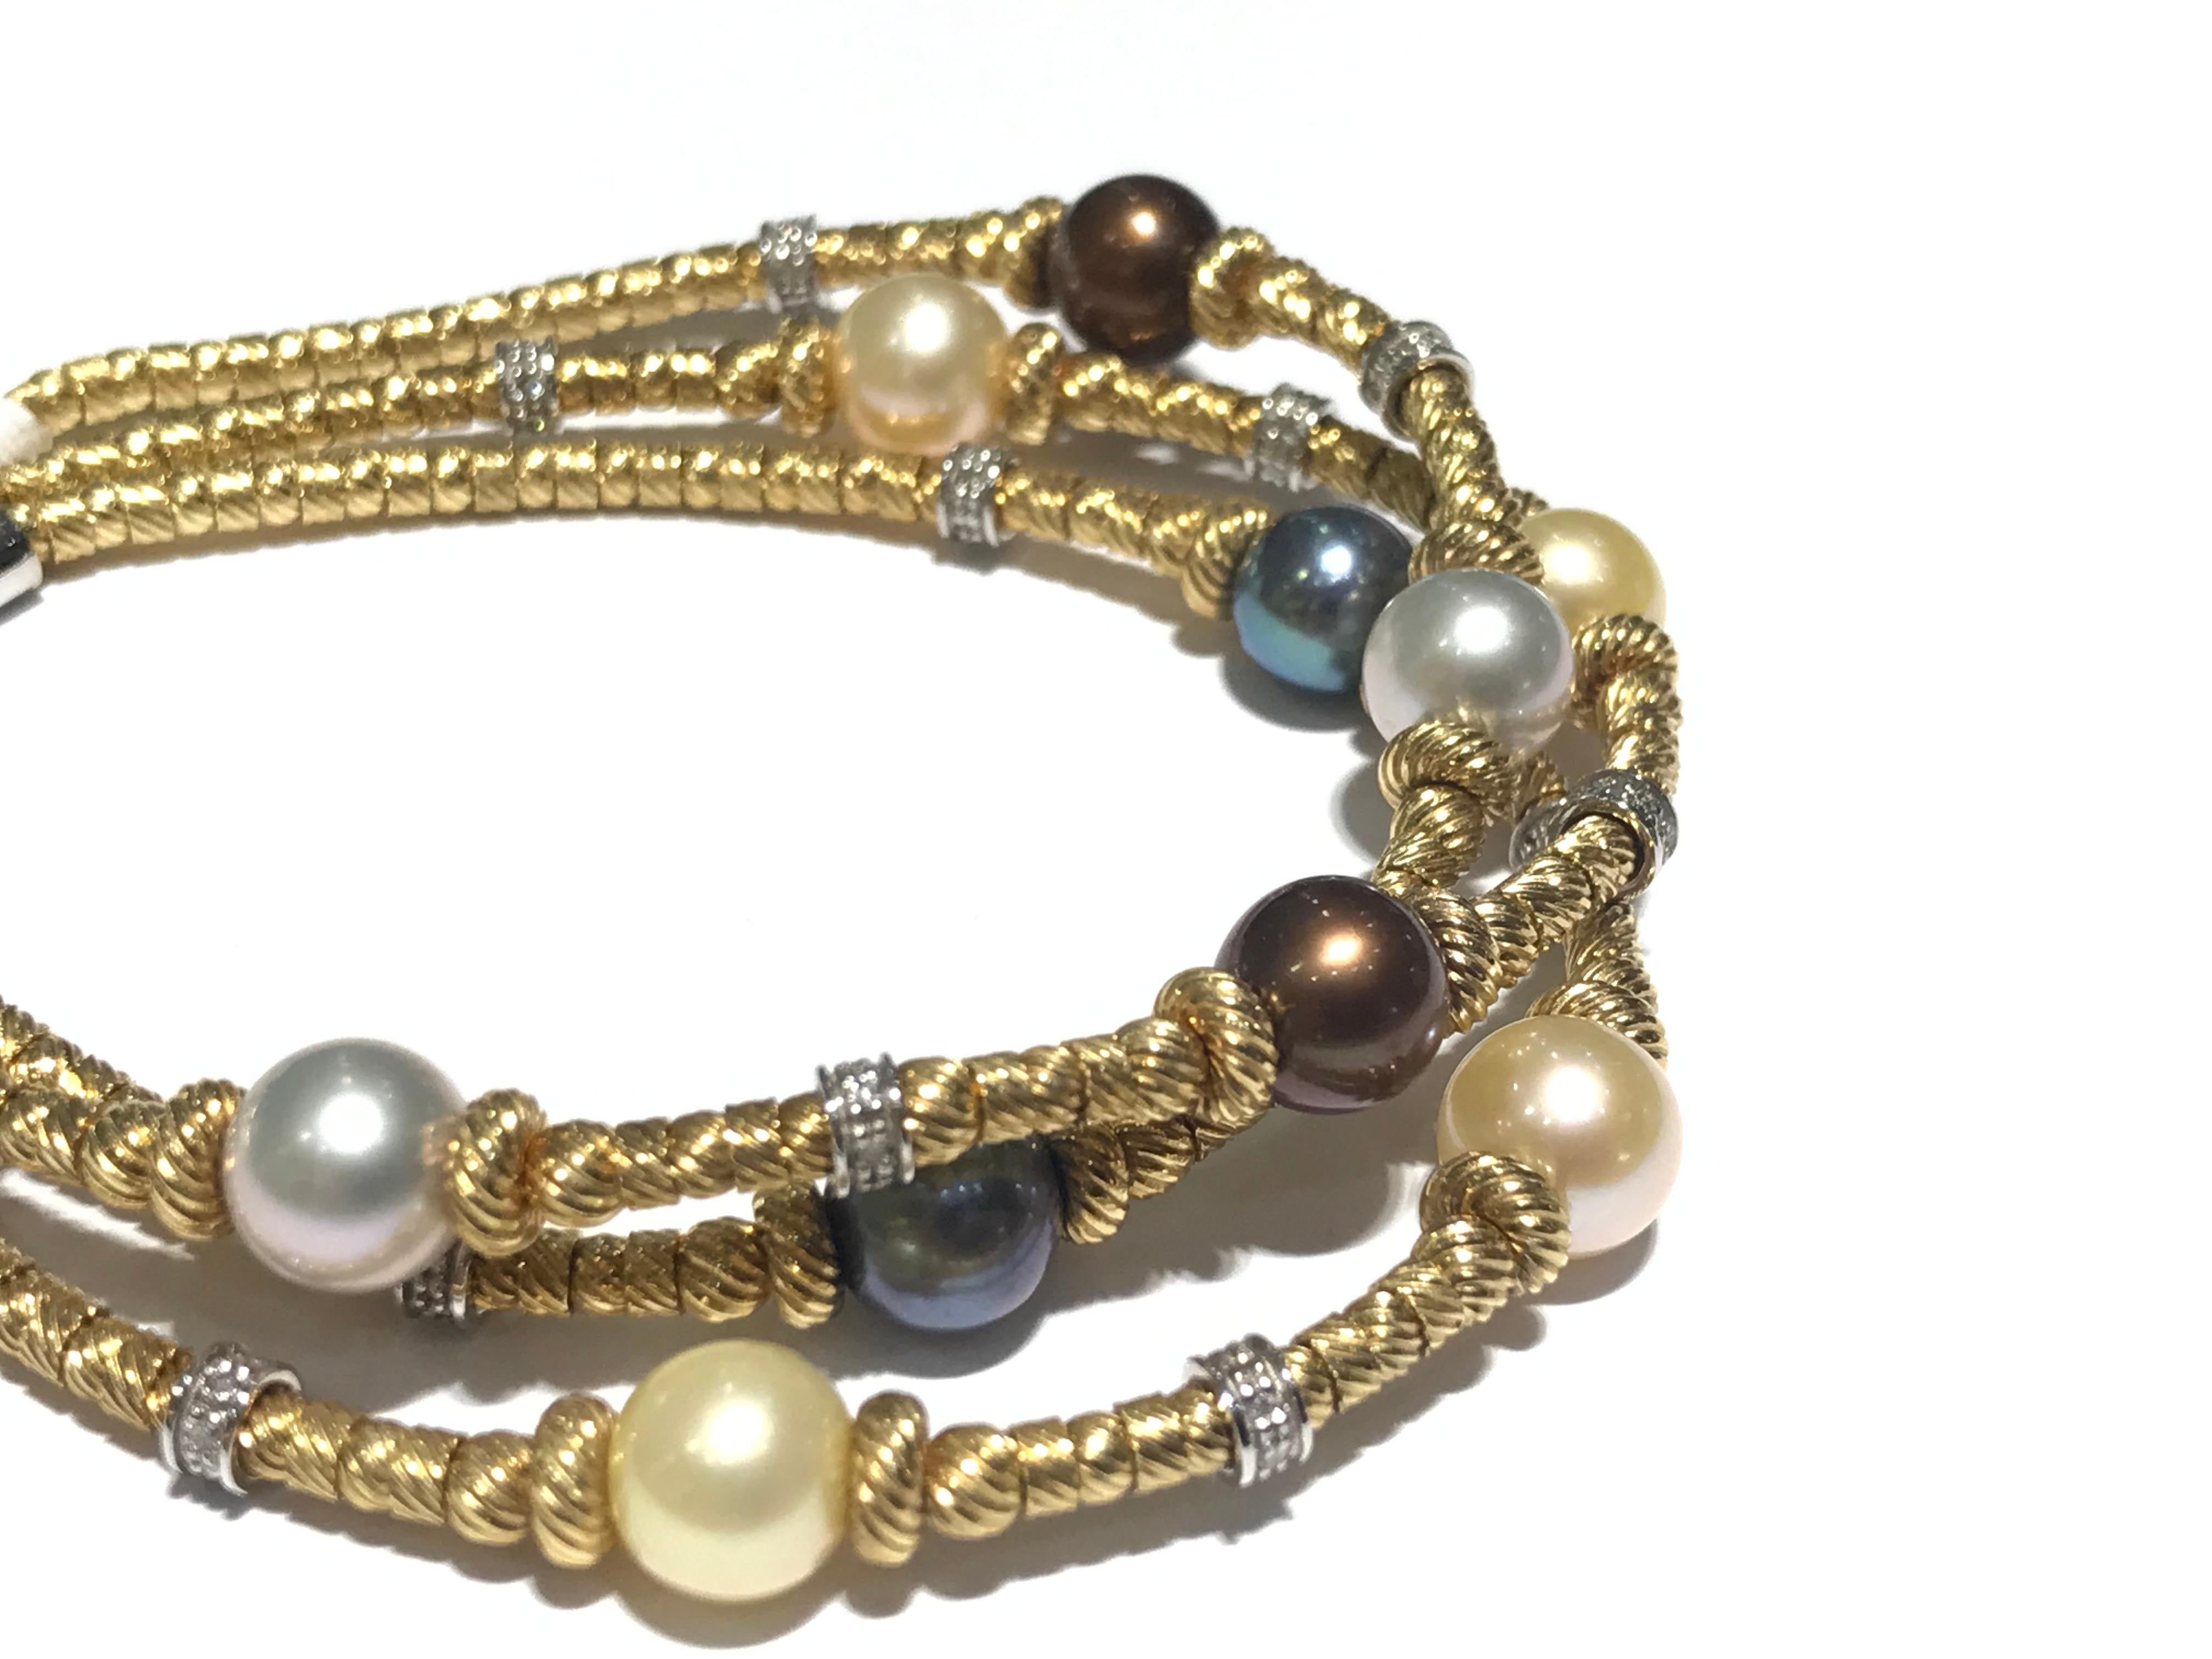 Cultured Pearl and diamond Bracelet in 18 karat y/g with 0.40 ct diamonds 
2 brown pearls
3 white pearls 
2 grey pearls 
2 black pearls
1 yellow pearl 